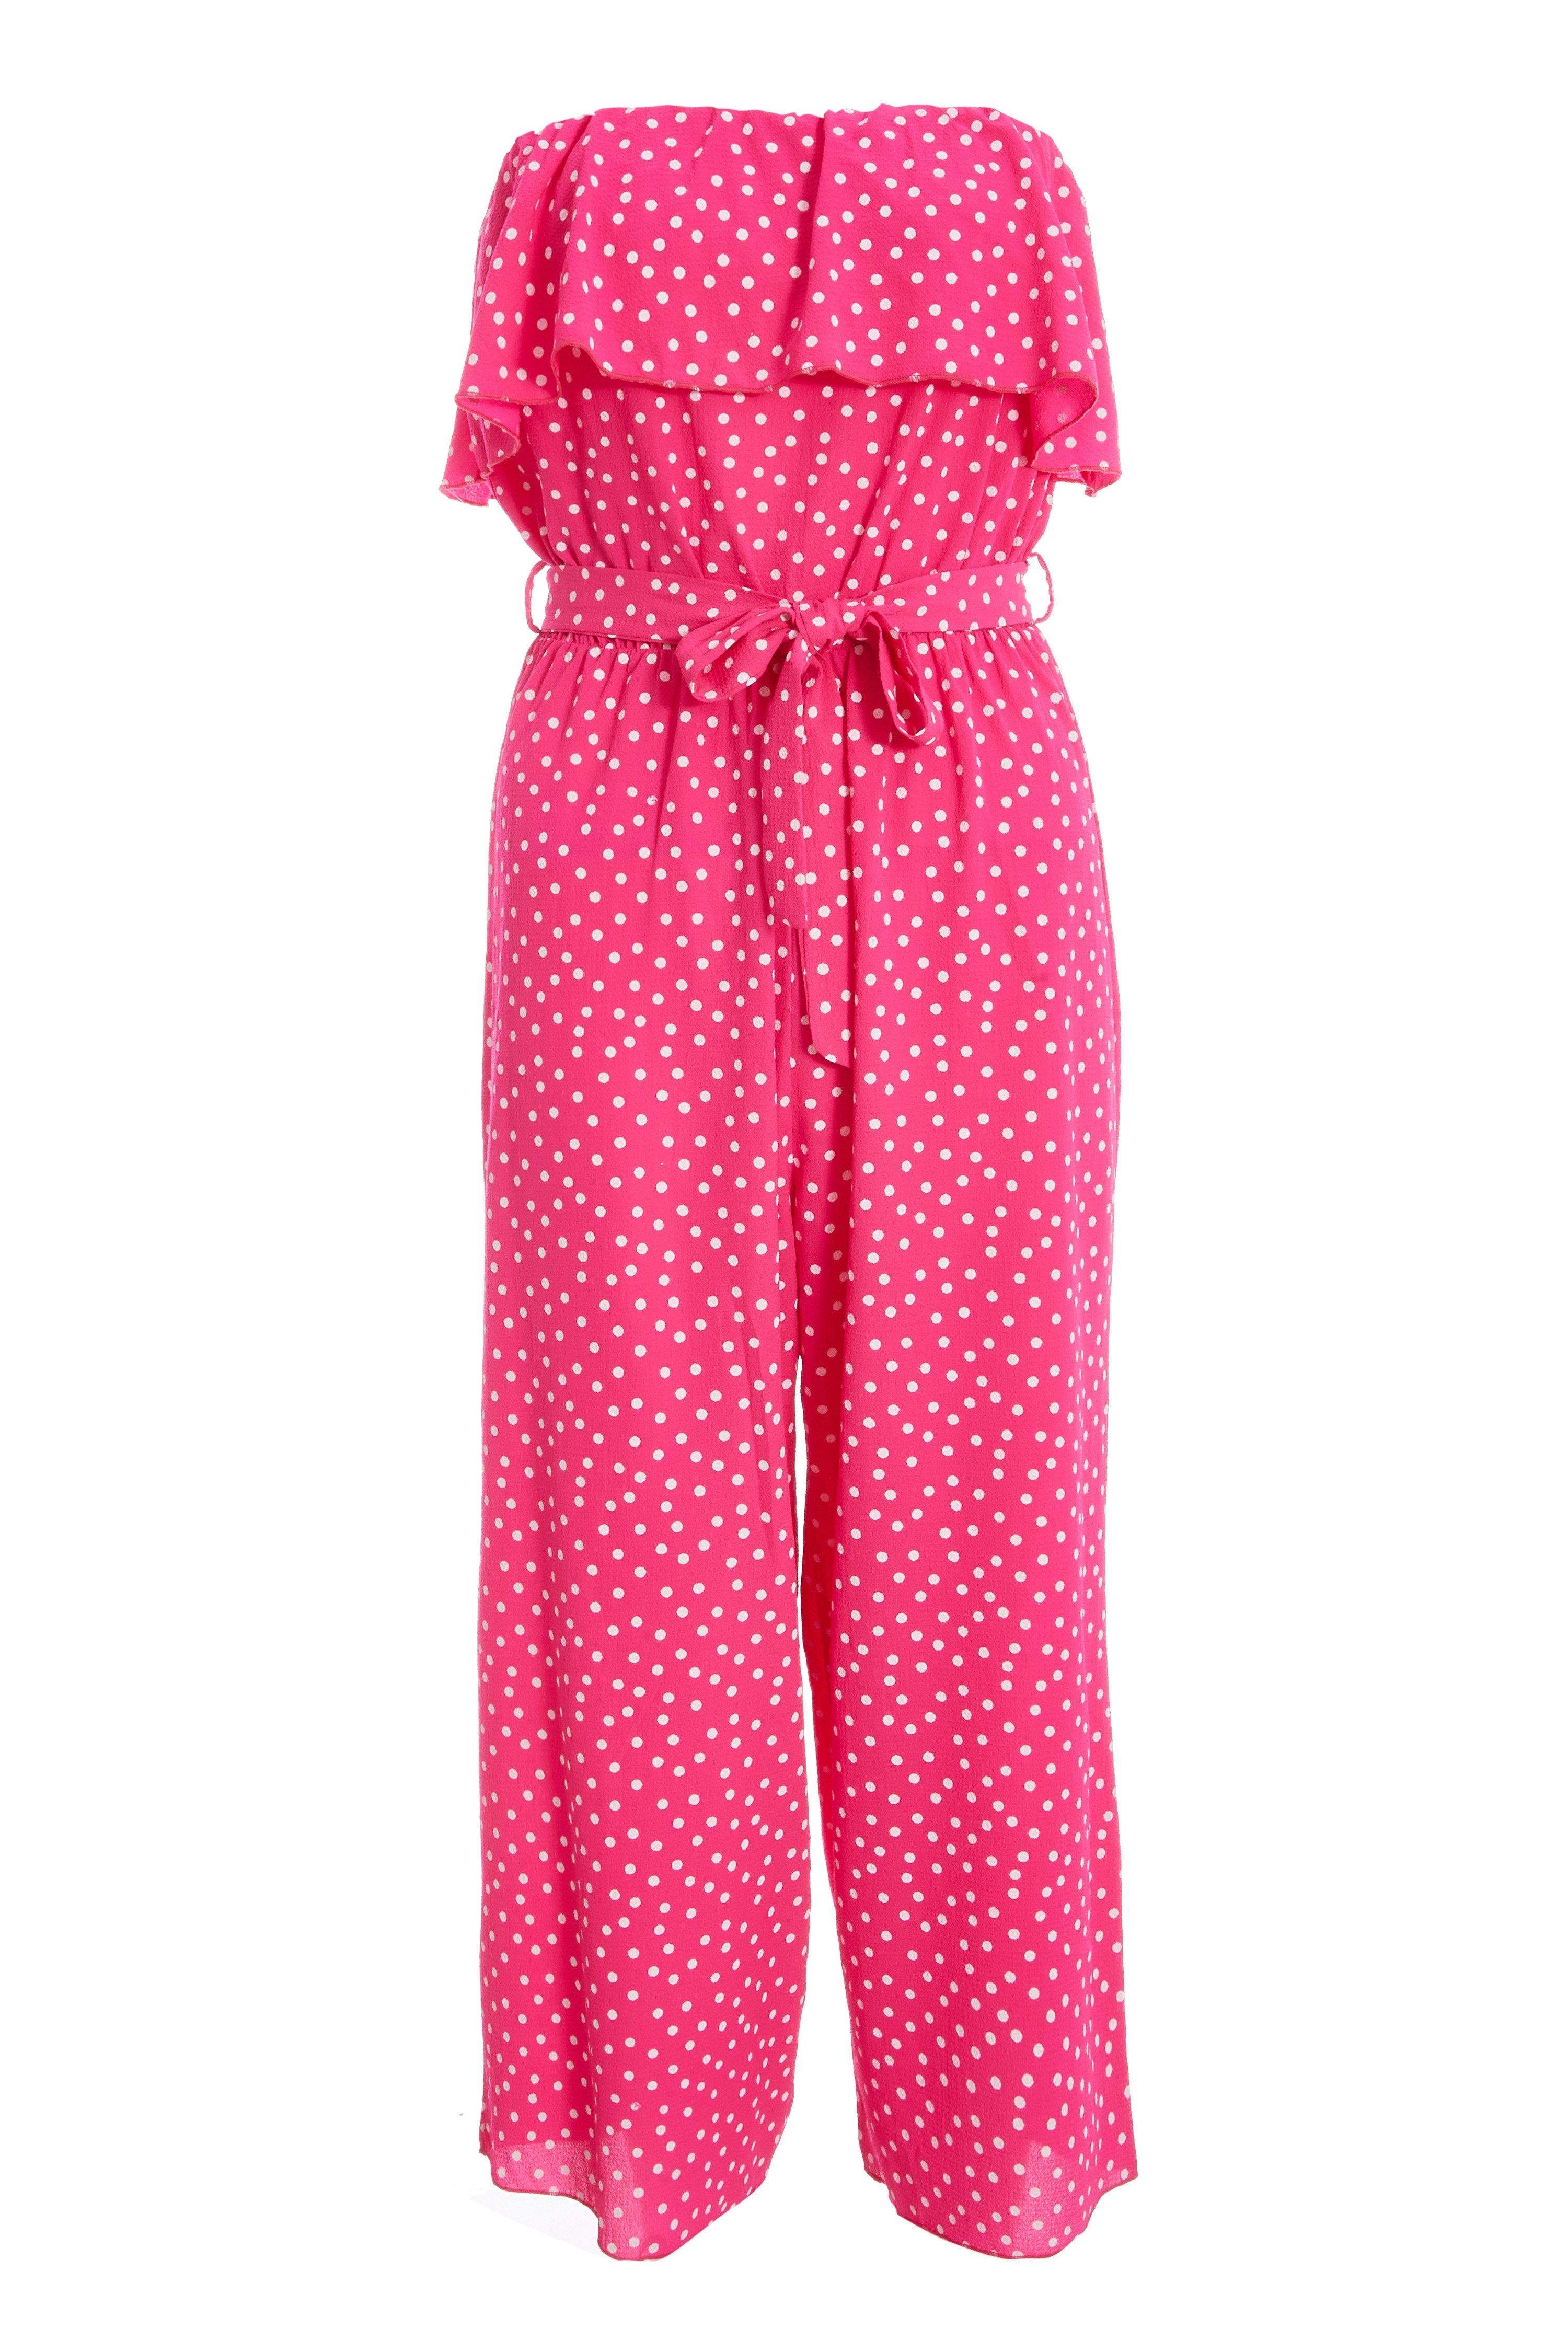 Pink and White Polka Dot Culotte Jumpsuit - Quiz Clothing